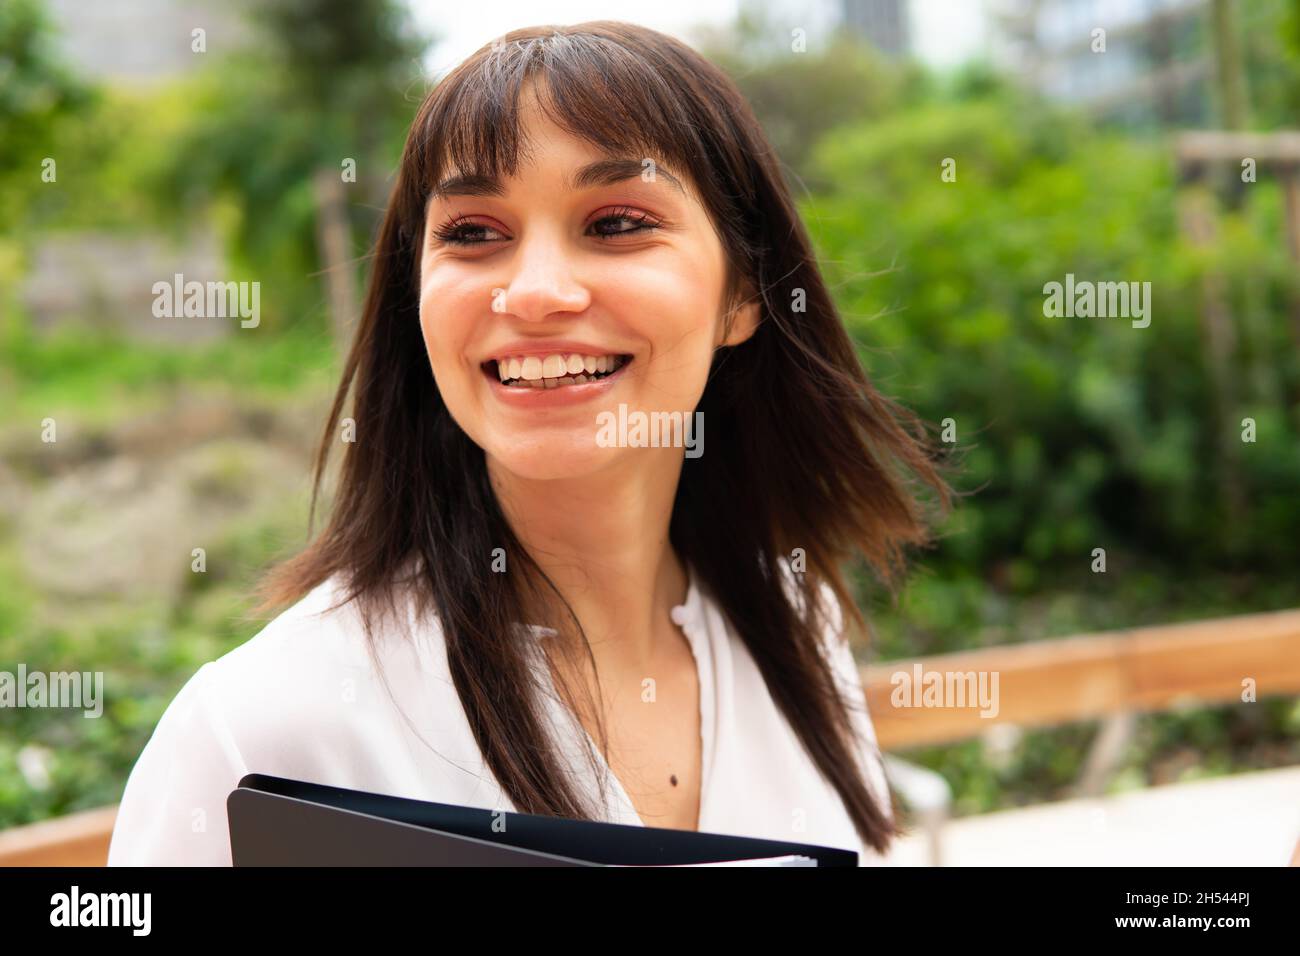 Cheerful female manager smiling and looking away while standing on blurred background of park Stock Photo